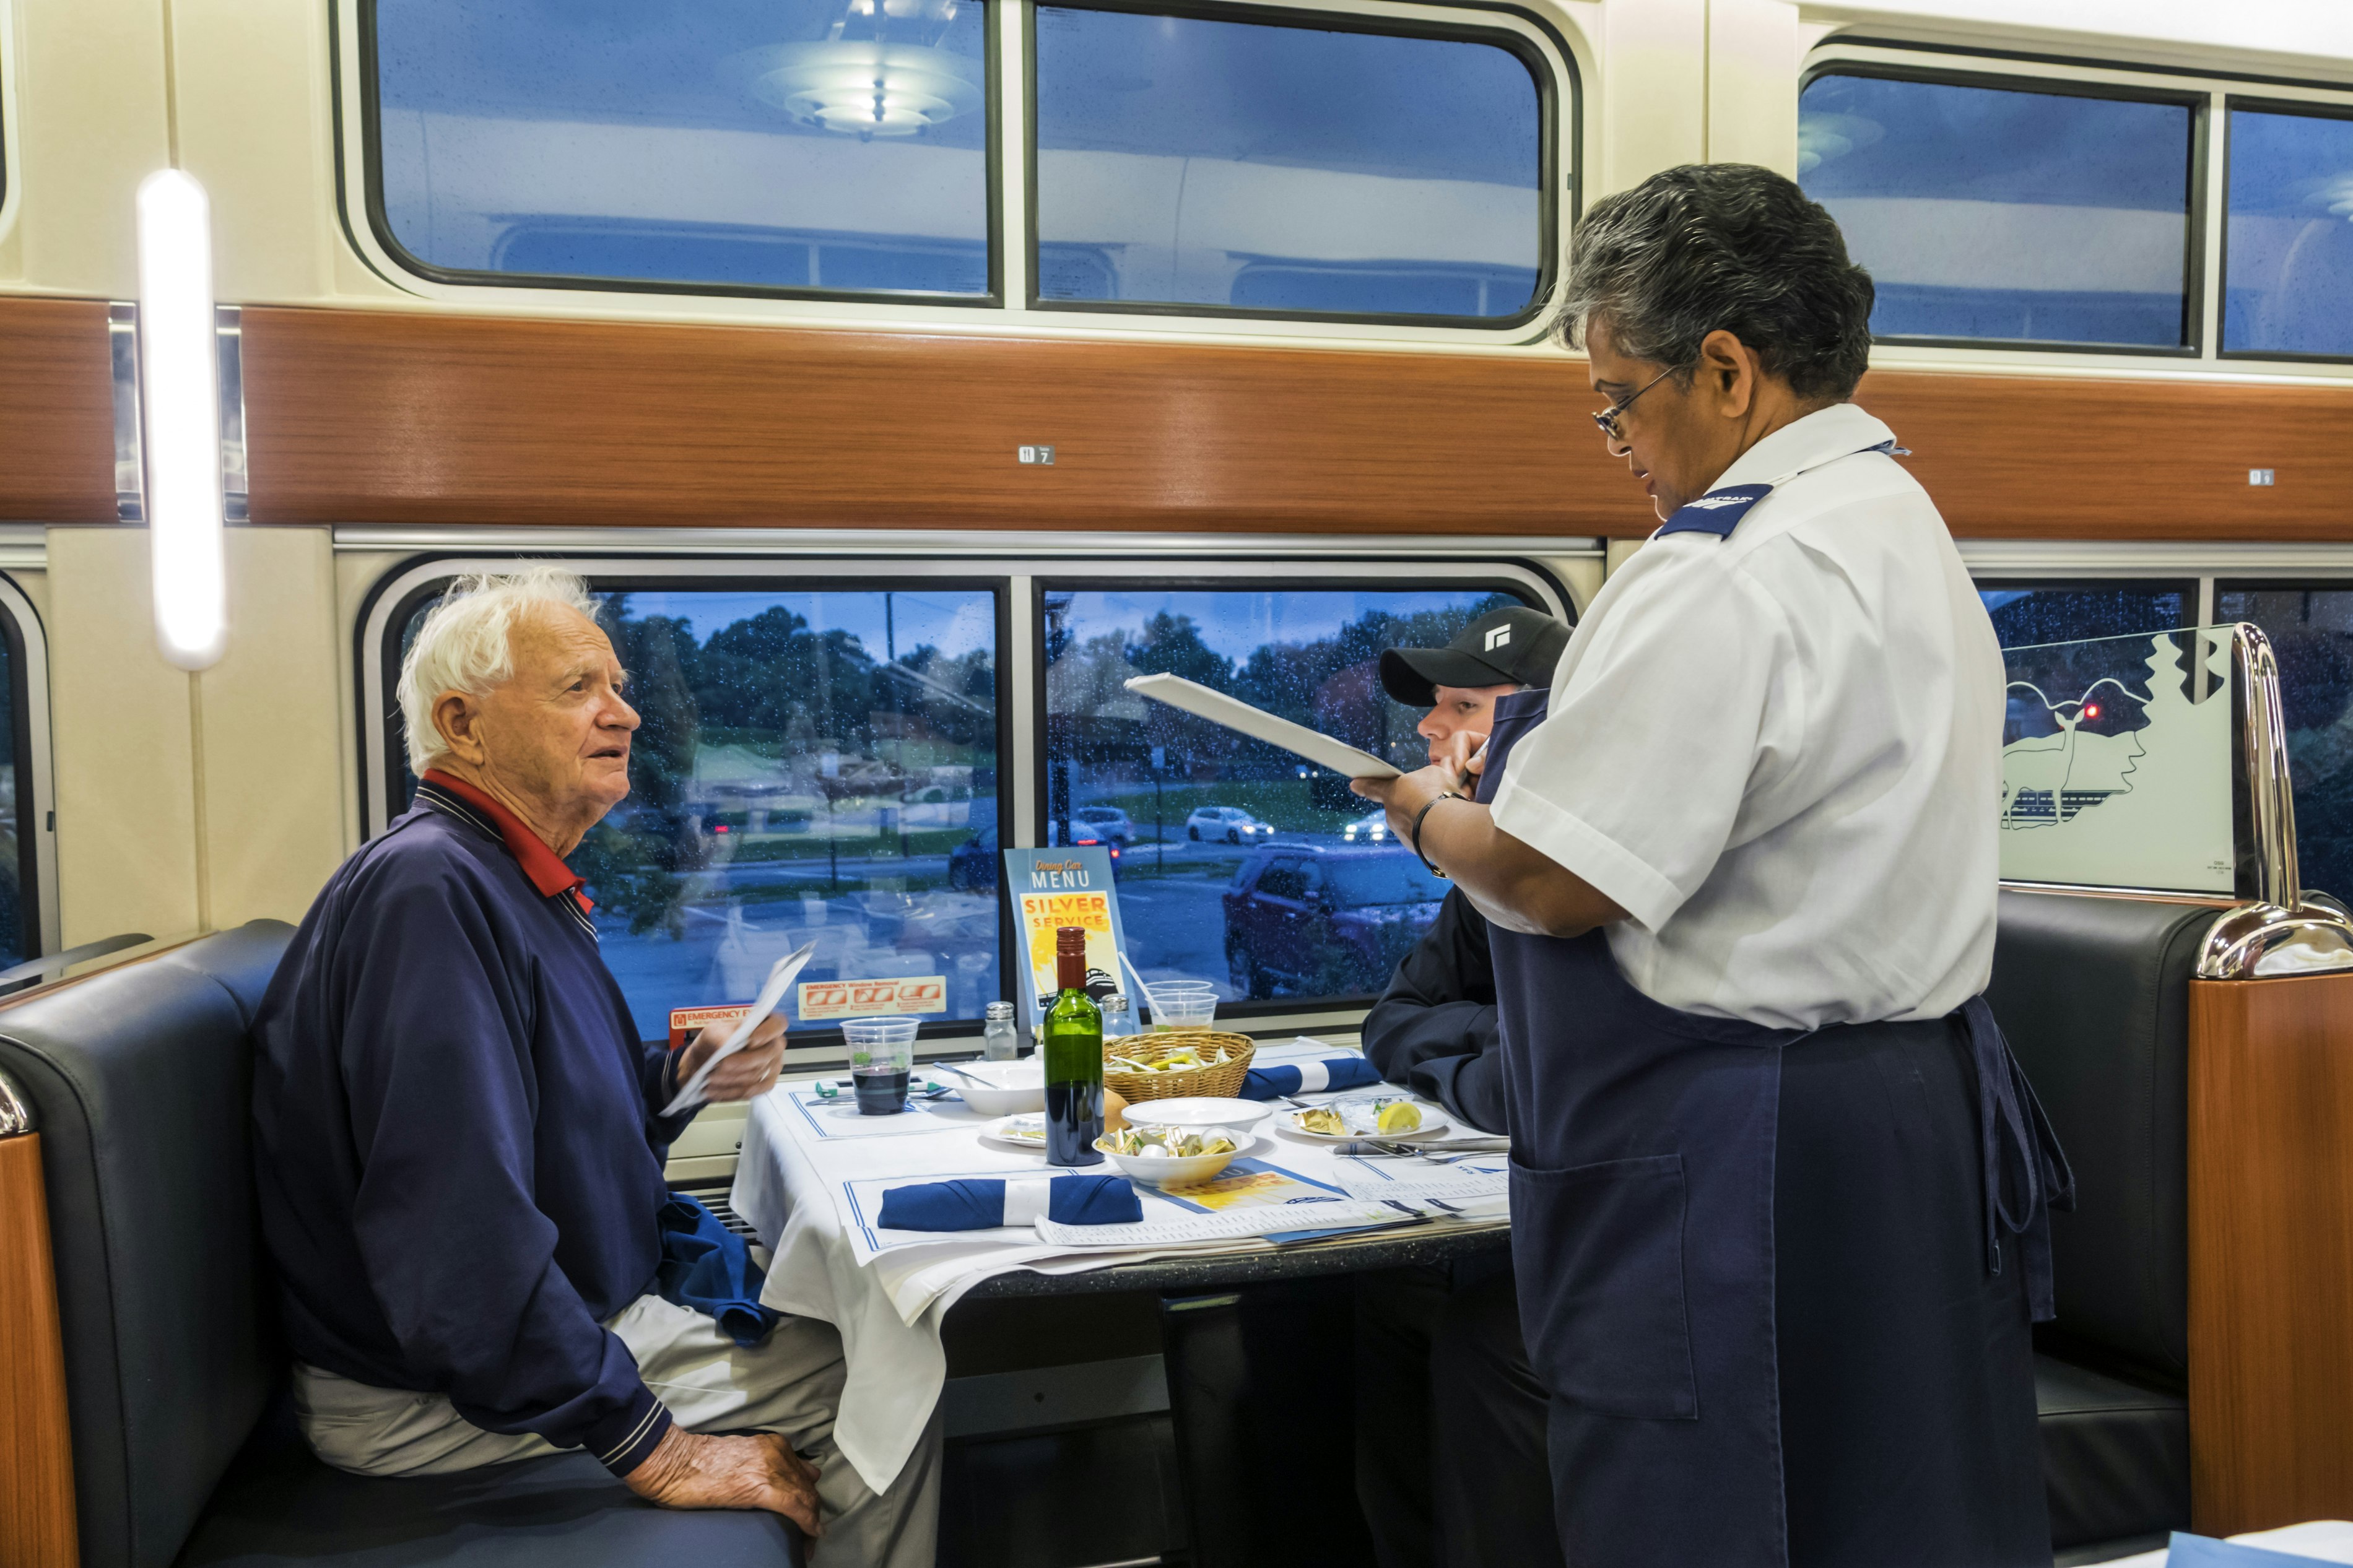 A waitress in a white tailored shirt with Amtrak-branded epaulets and a blue apron takes an order from a senior gentleman with white hair and a blue sweatshirt in the traditional Amtrak dining car, complete with white table cloths, blue cloth napkins, a green wine bottle, wicker bread basket, and a view of a train station parking lot at twilight.